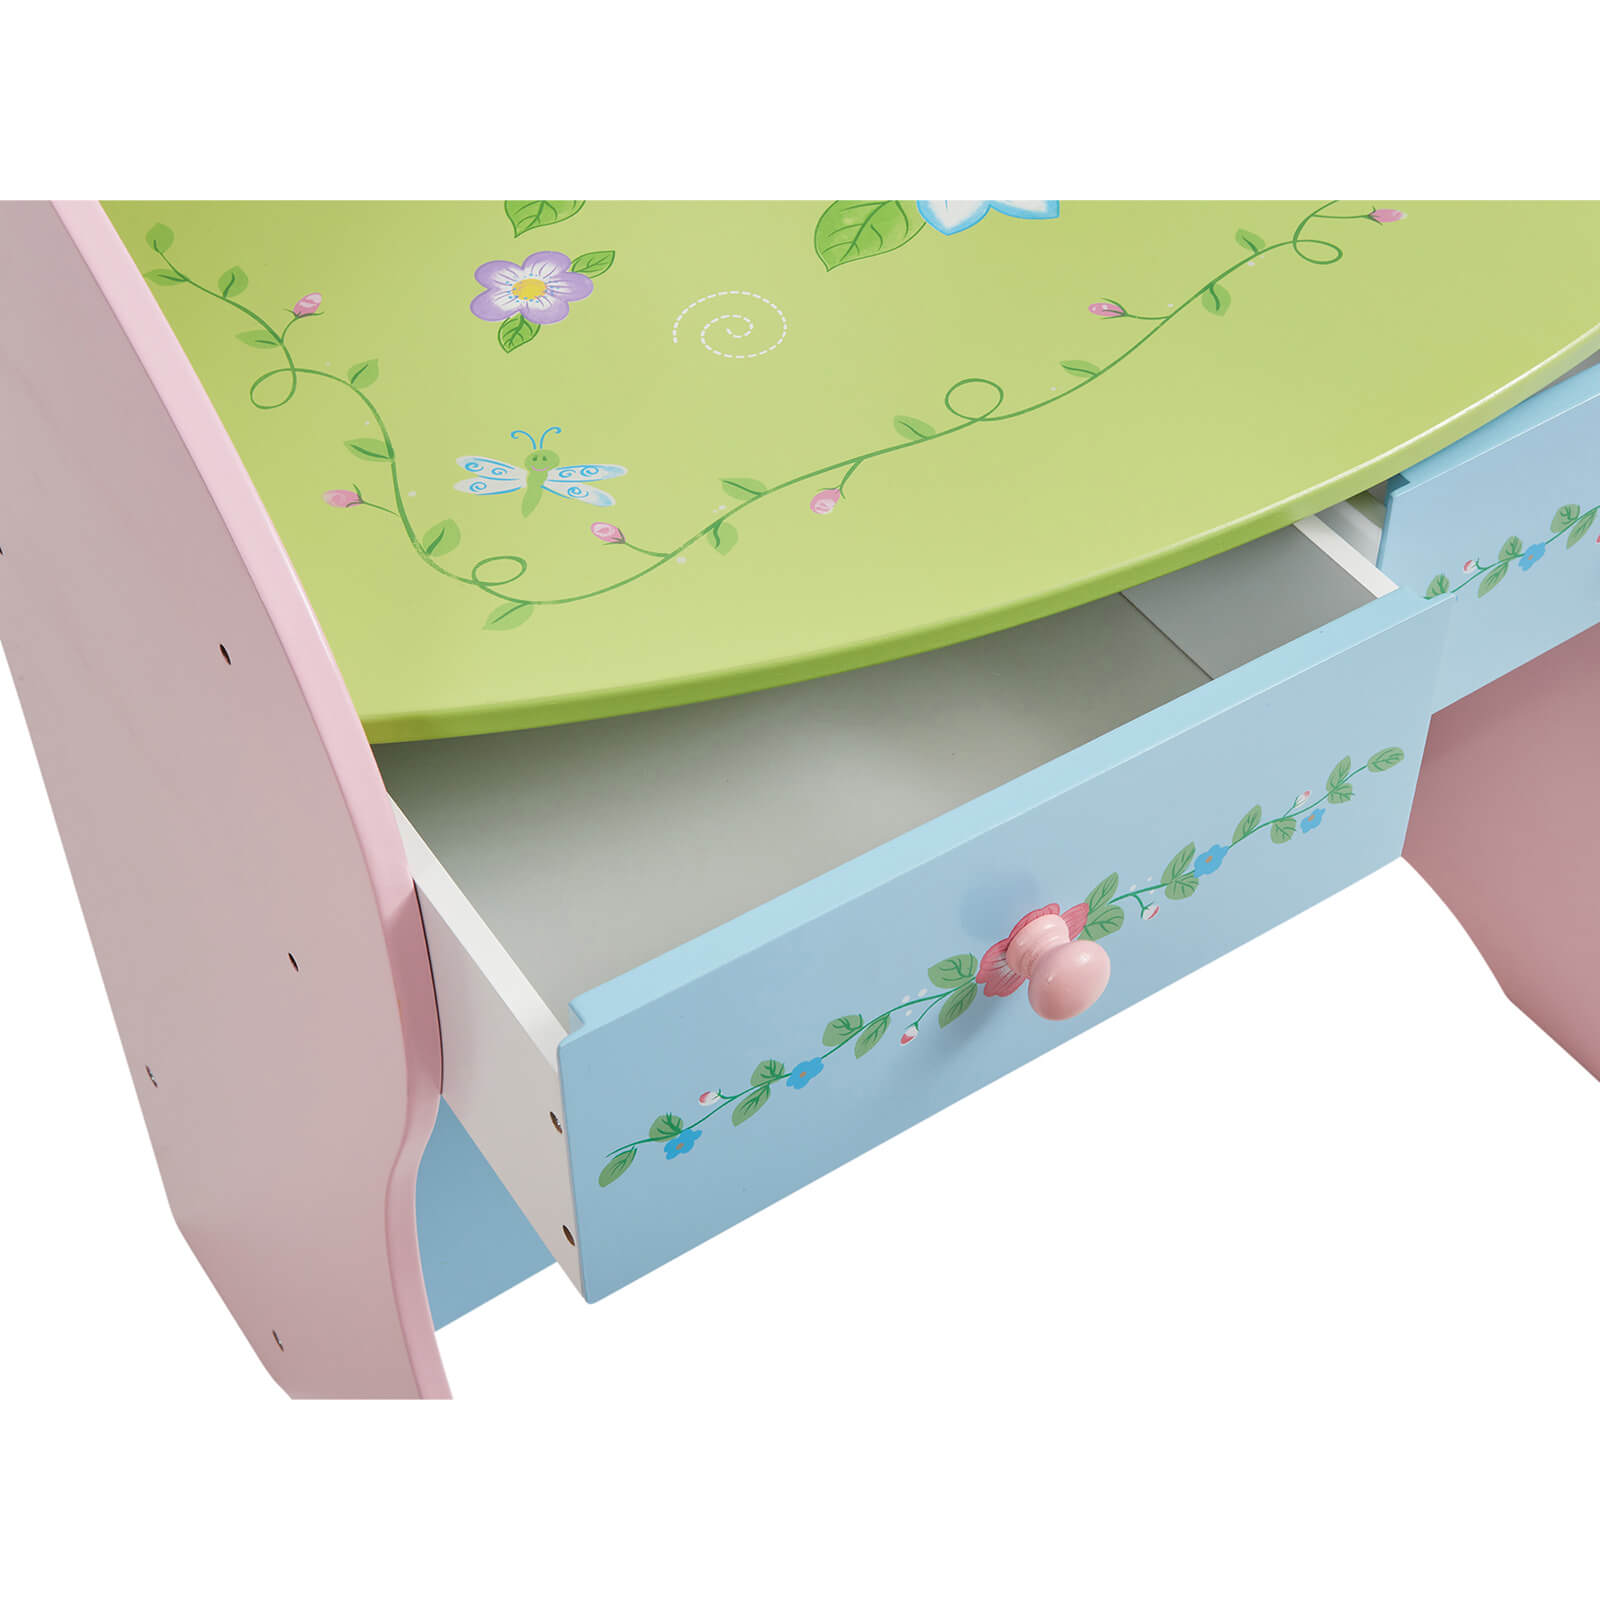 Fairy Dressing Table and Chair